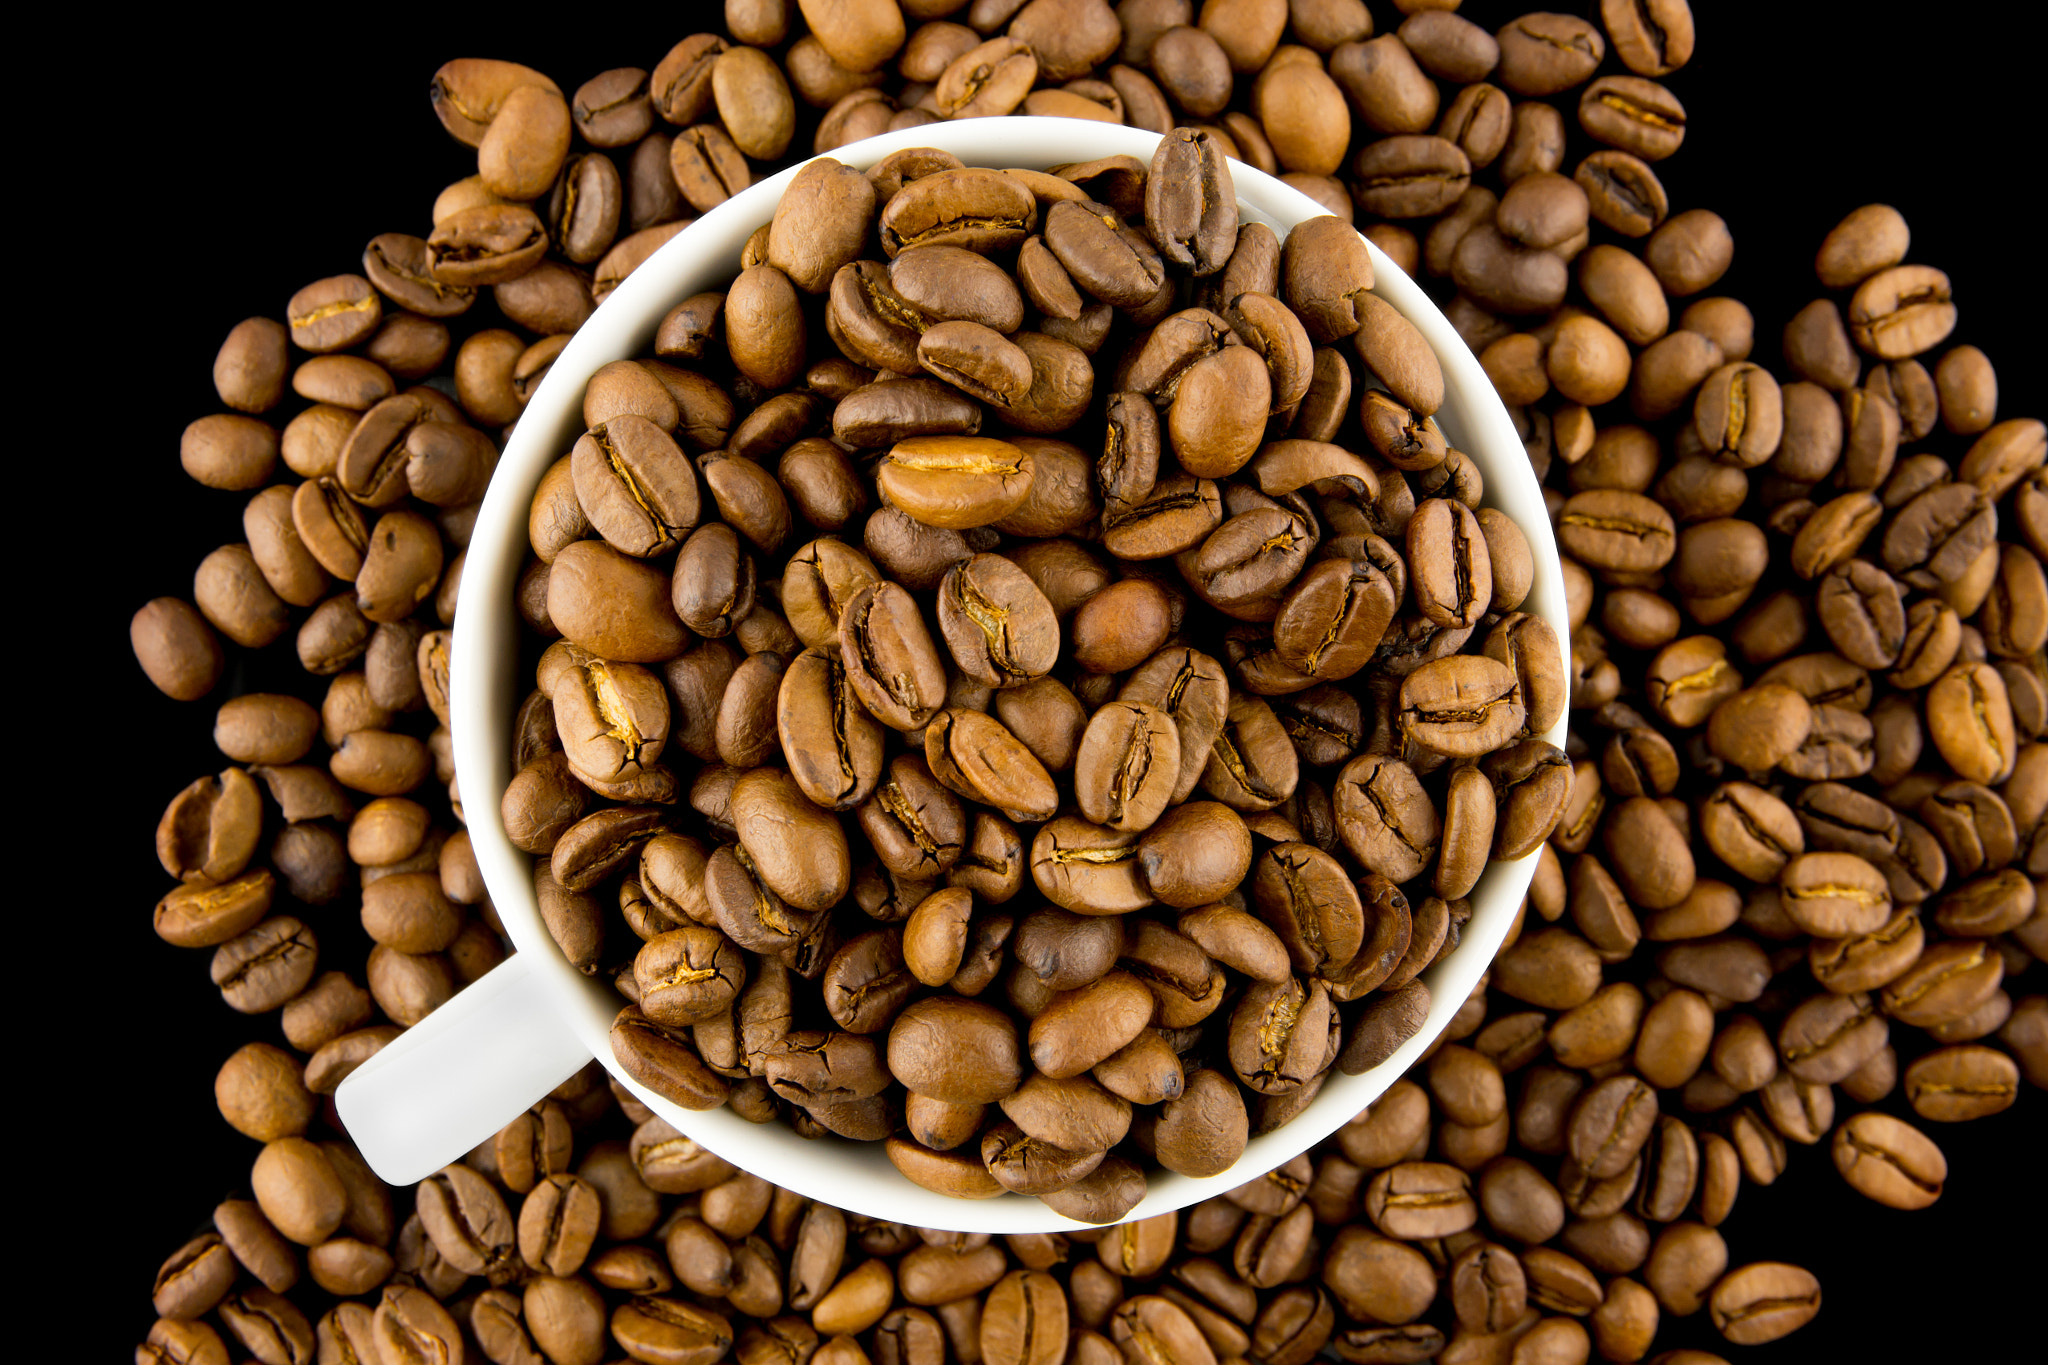 Aerial view of a cup filled with coffee beans